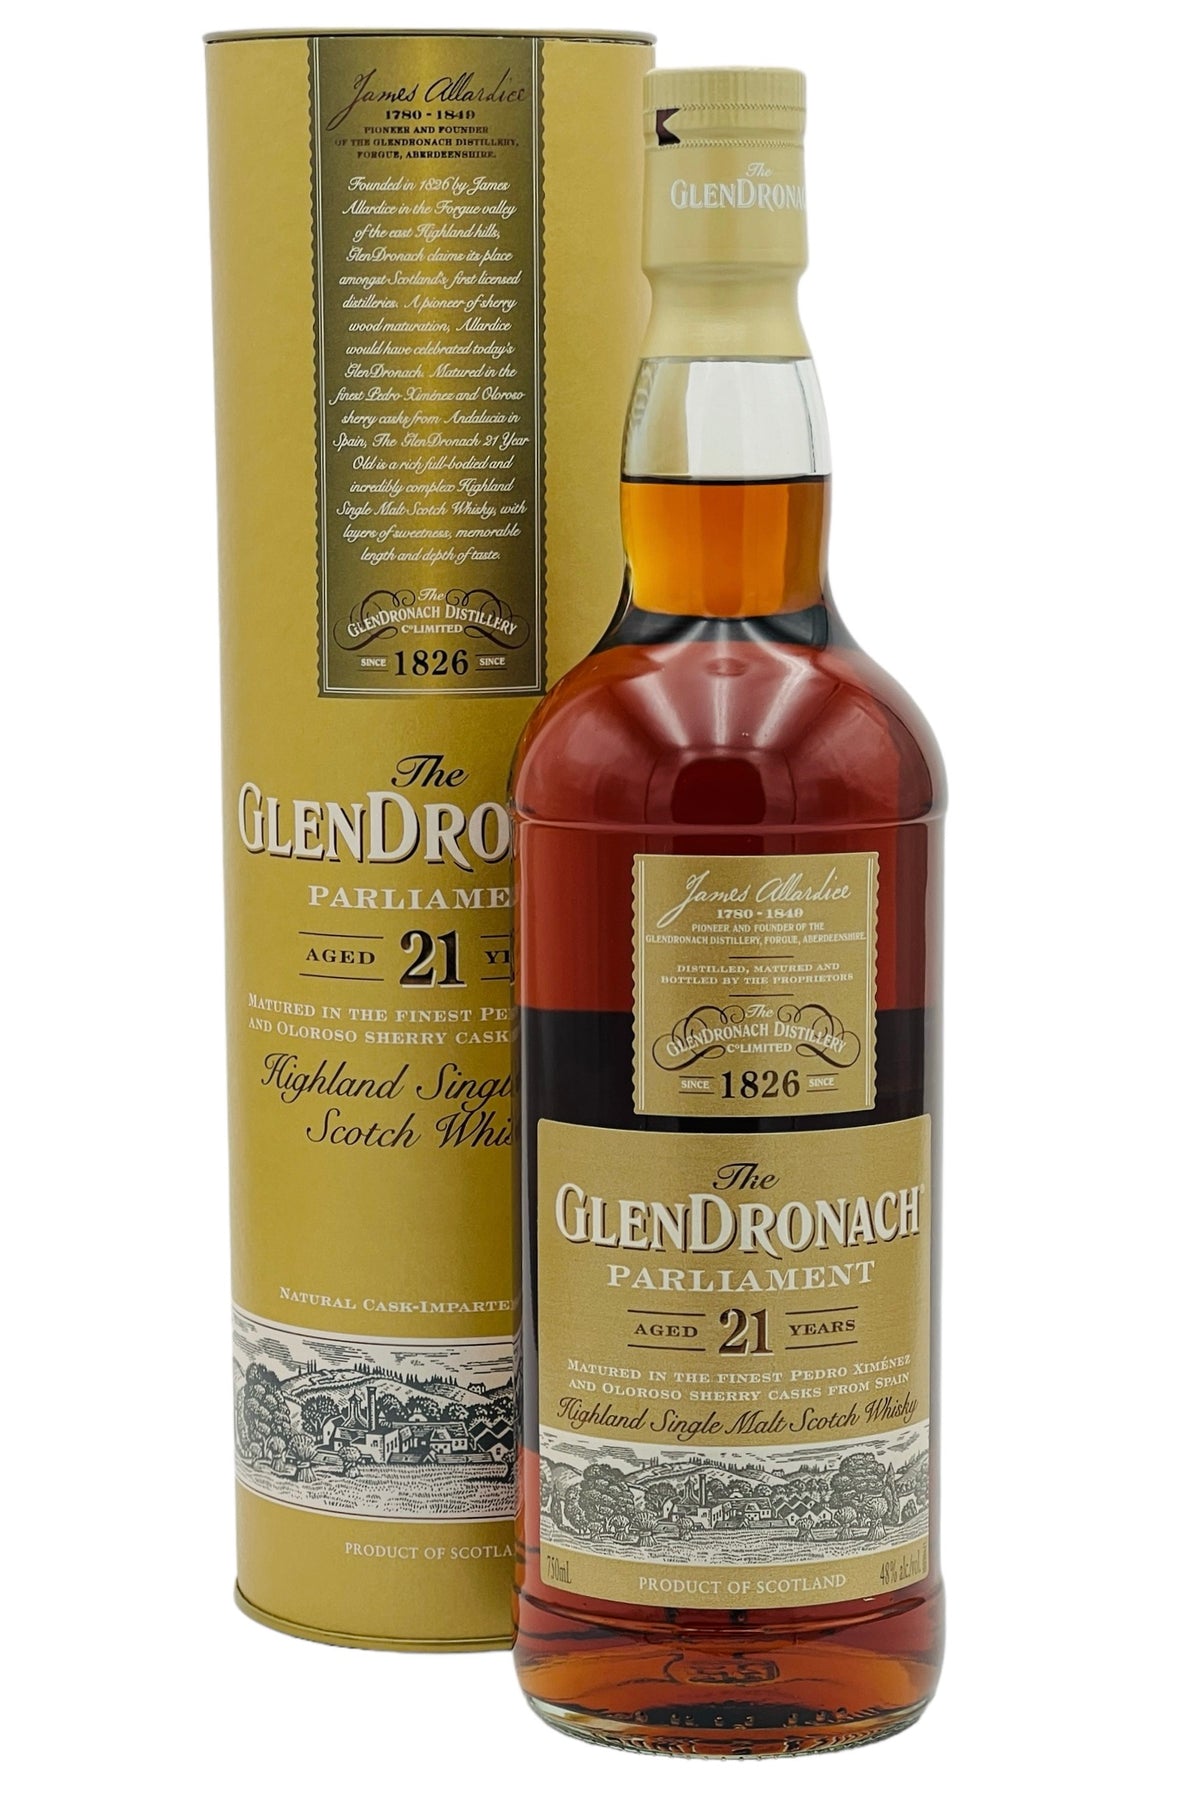 GlenDronach 21 Years Old Parliament Scotch Whisky